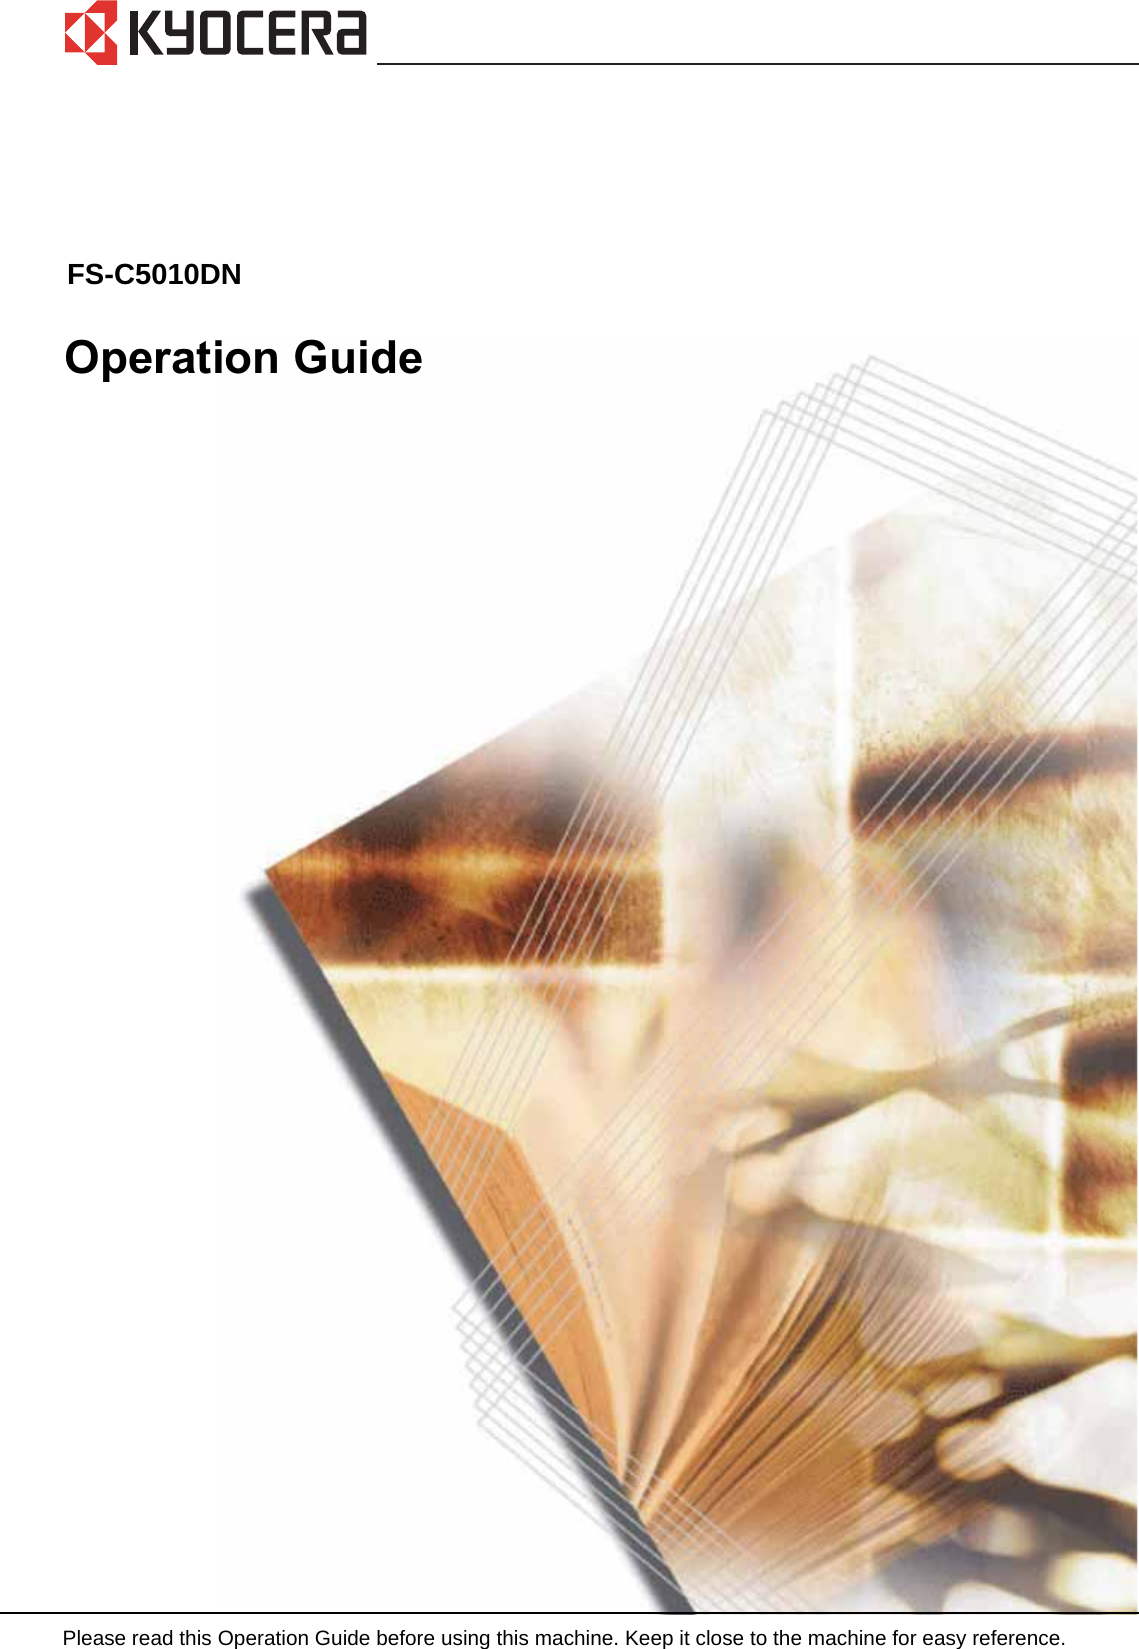  BASIC OPERATION GUIDE 1-1Operation GuideFS-C5010DNPlease read this Operation Guide before using this machine. Keep it close to the machine for easy reference.